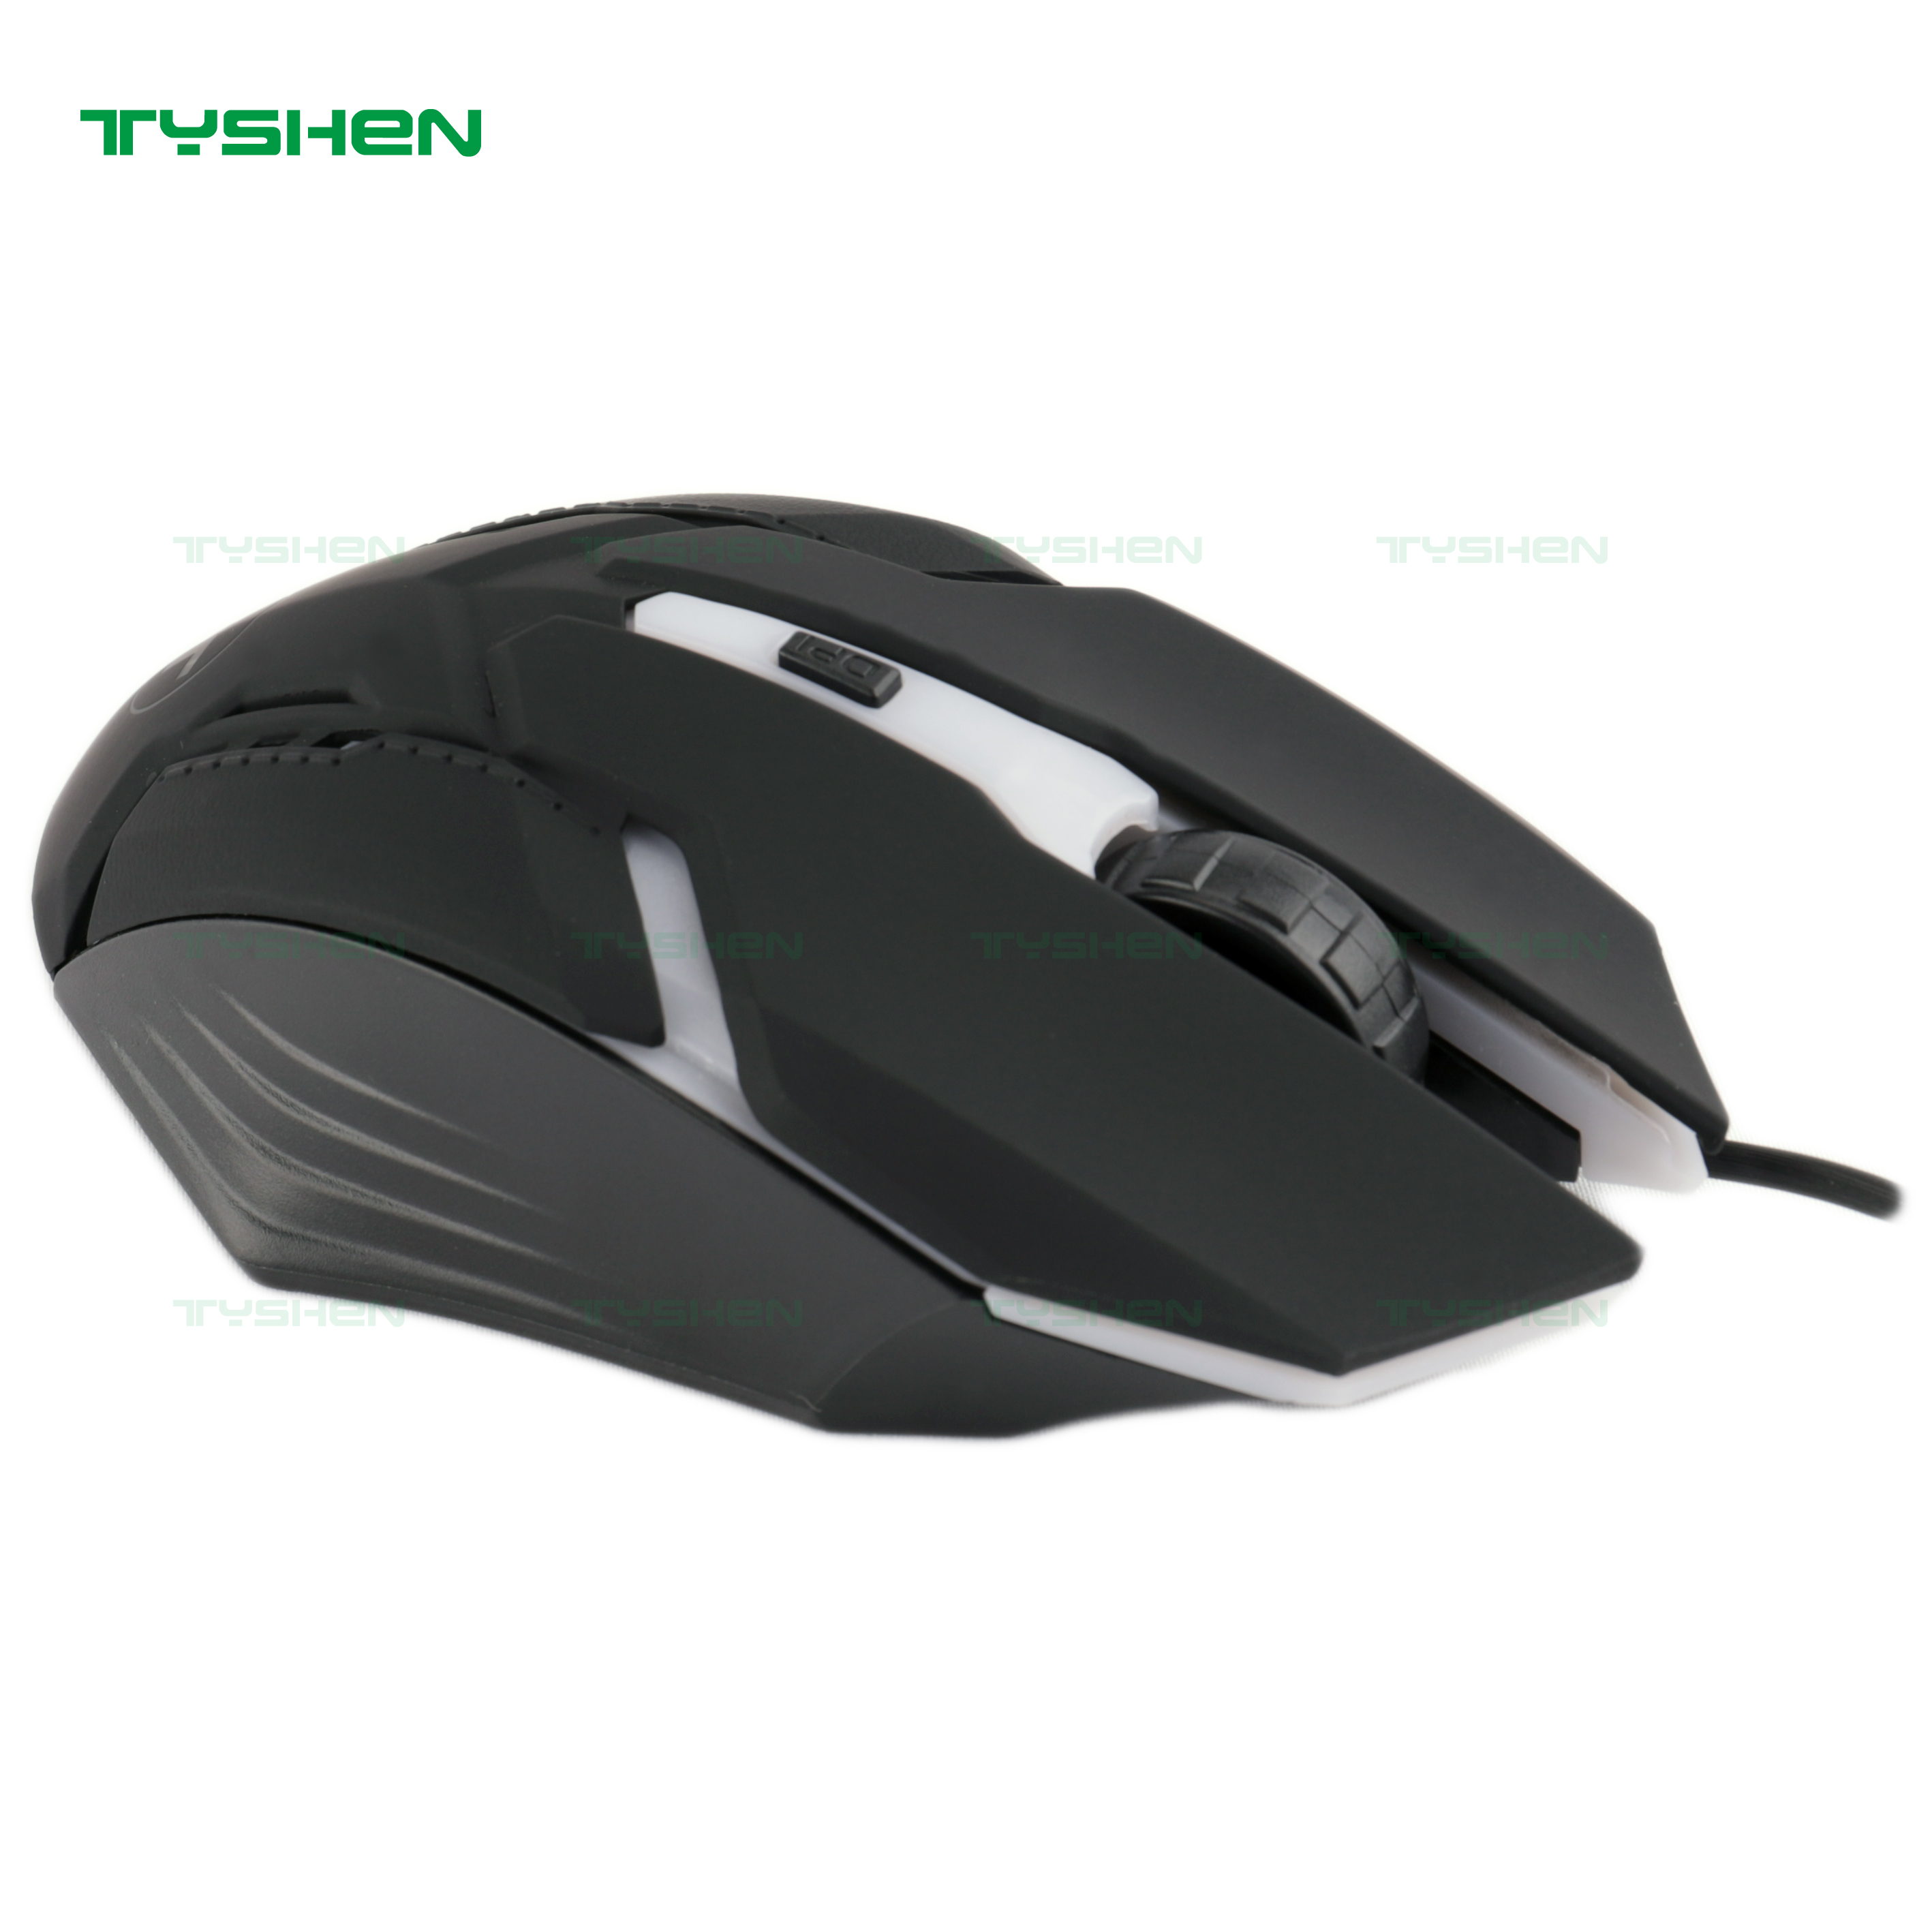 Cheap Gaming Mouse, 7 Color of Breathing Light